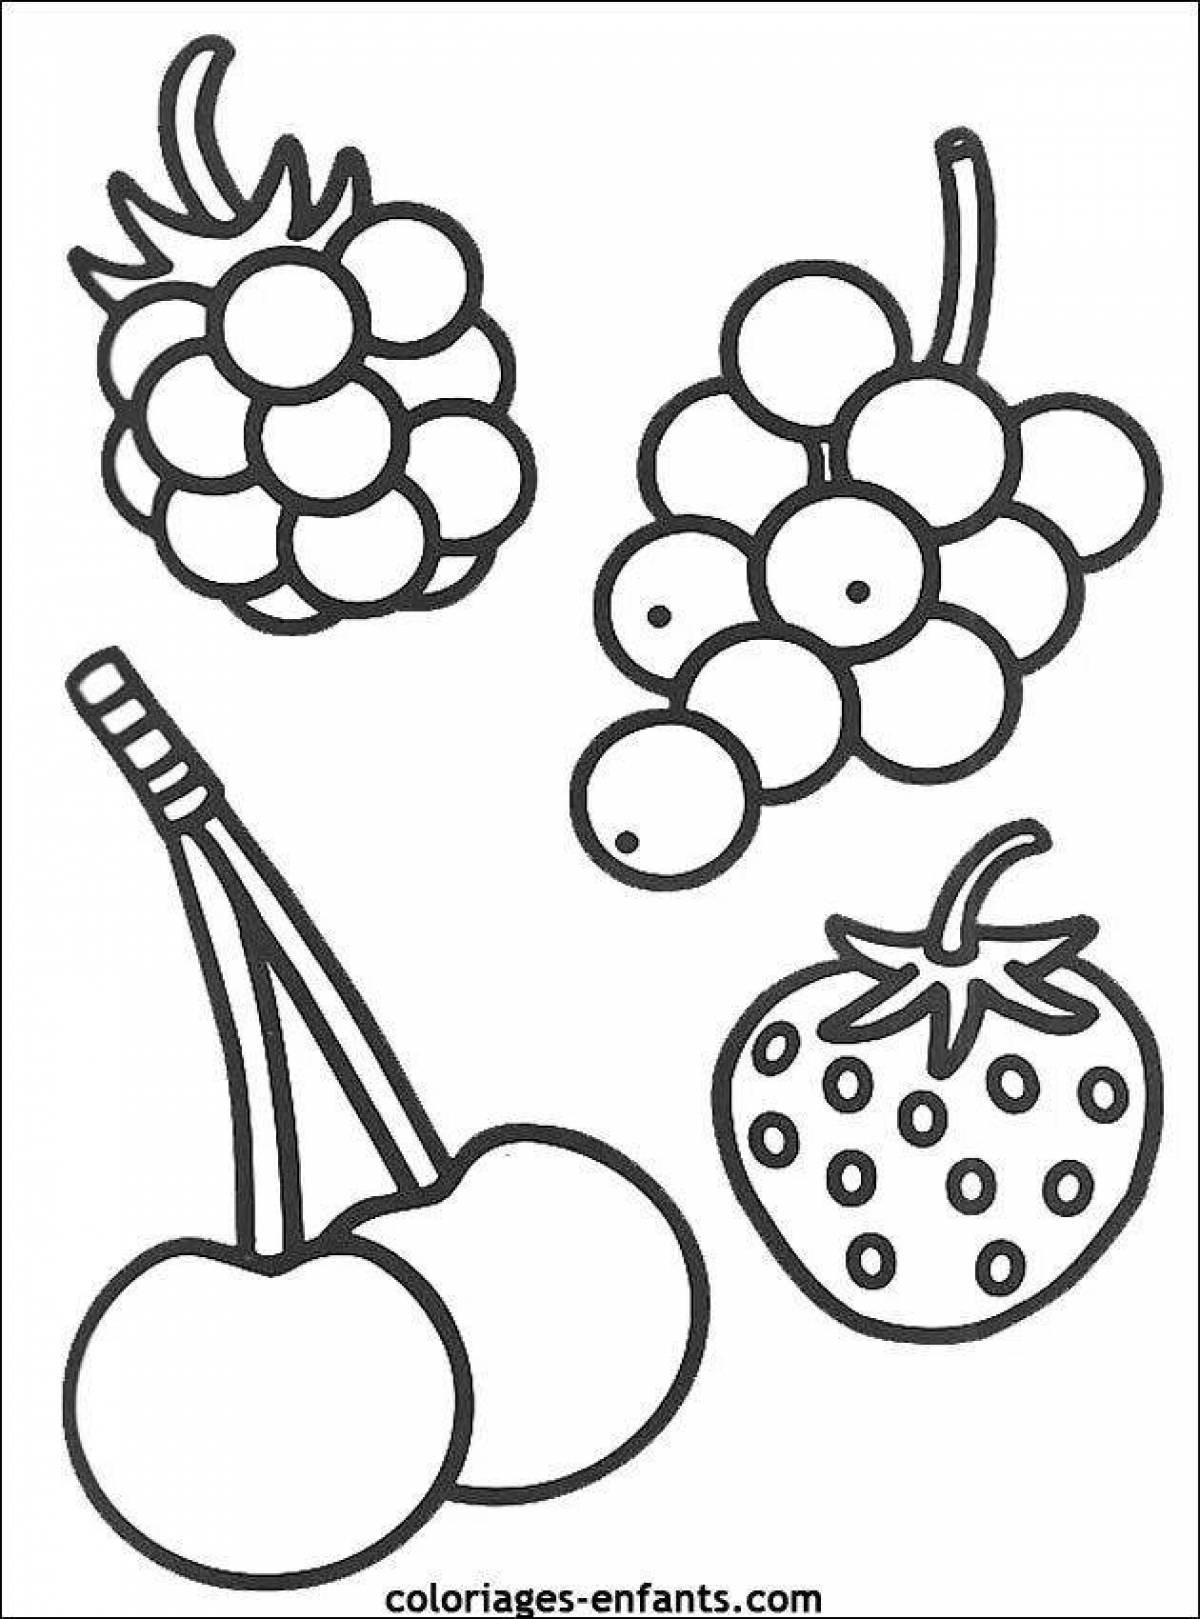 Interesting fruit coloring book for children 2-3 years old